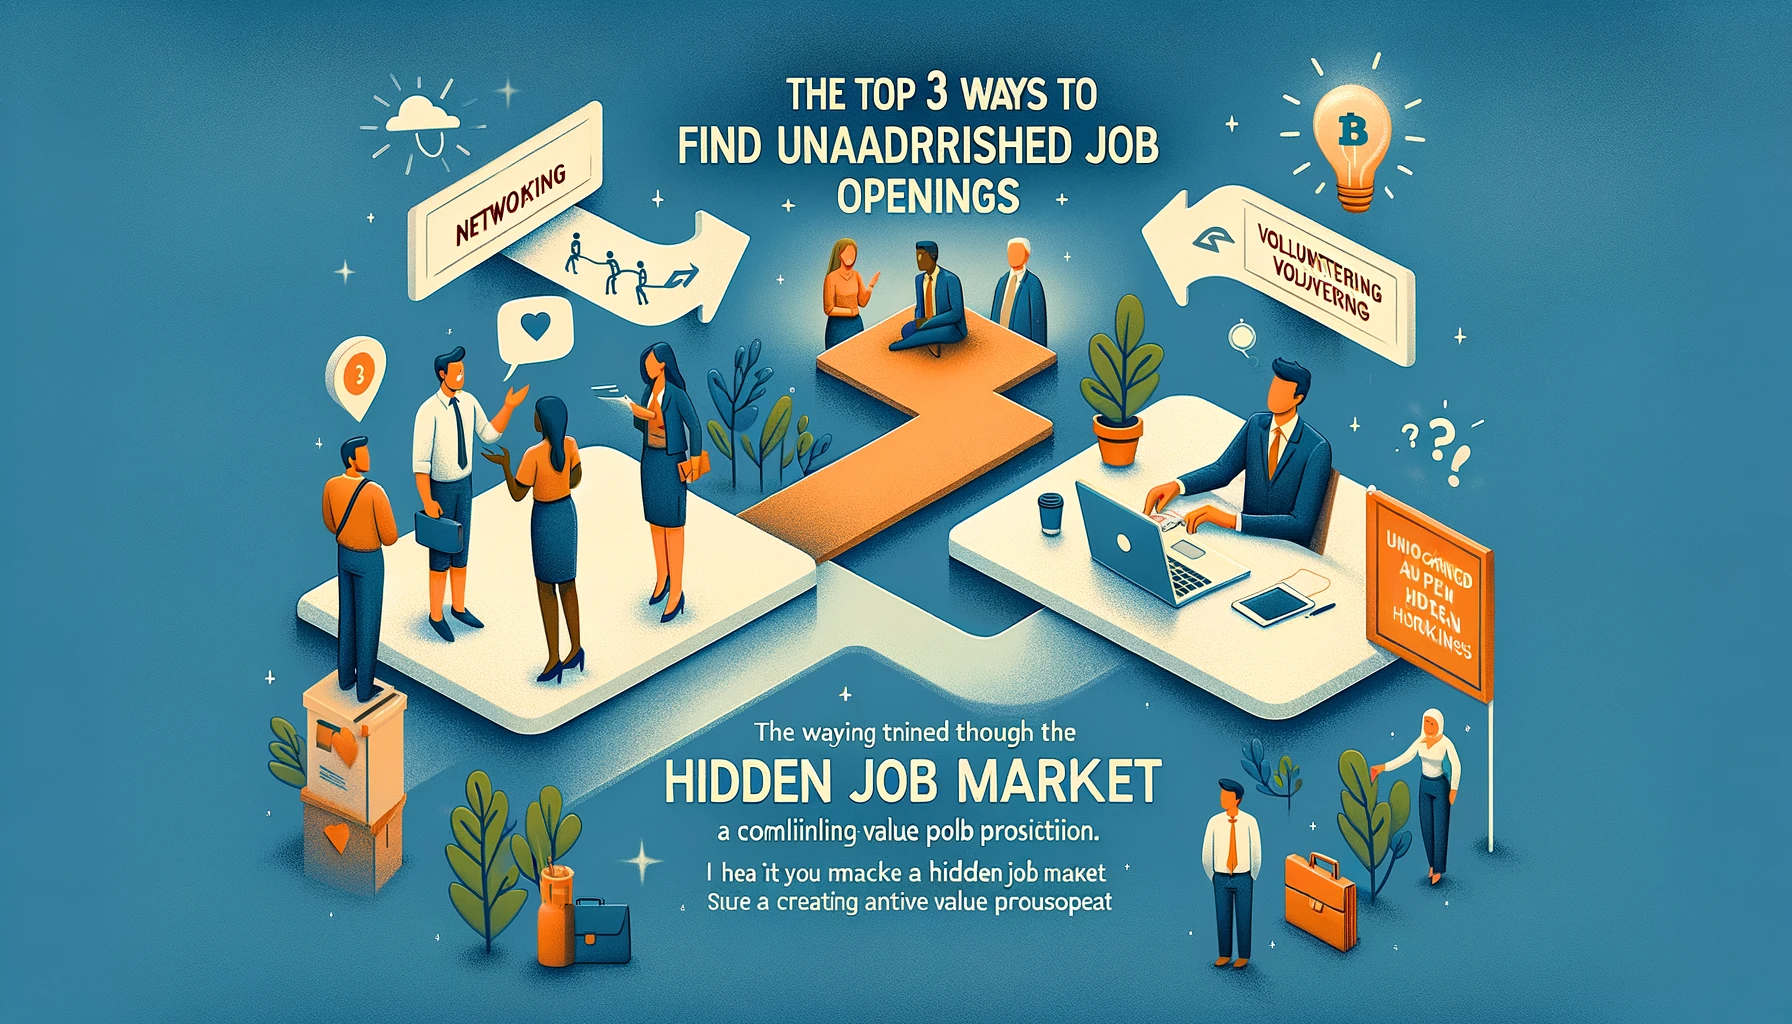 The Top 3 Ways to Find Unadvertised Job Openings